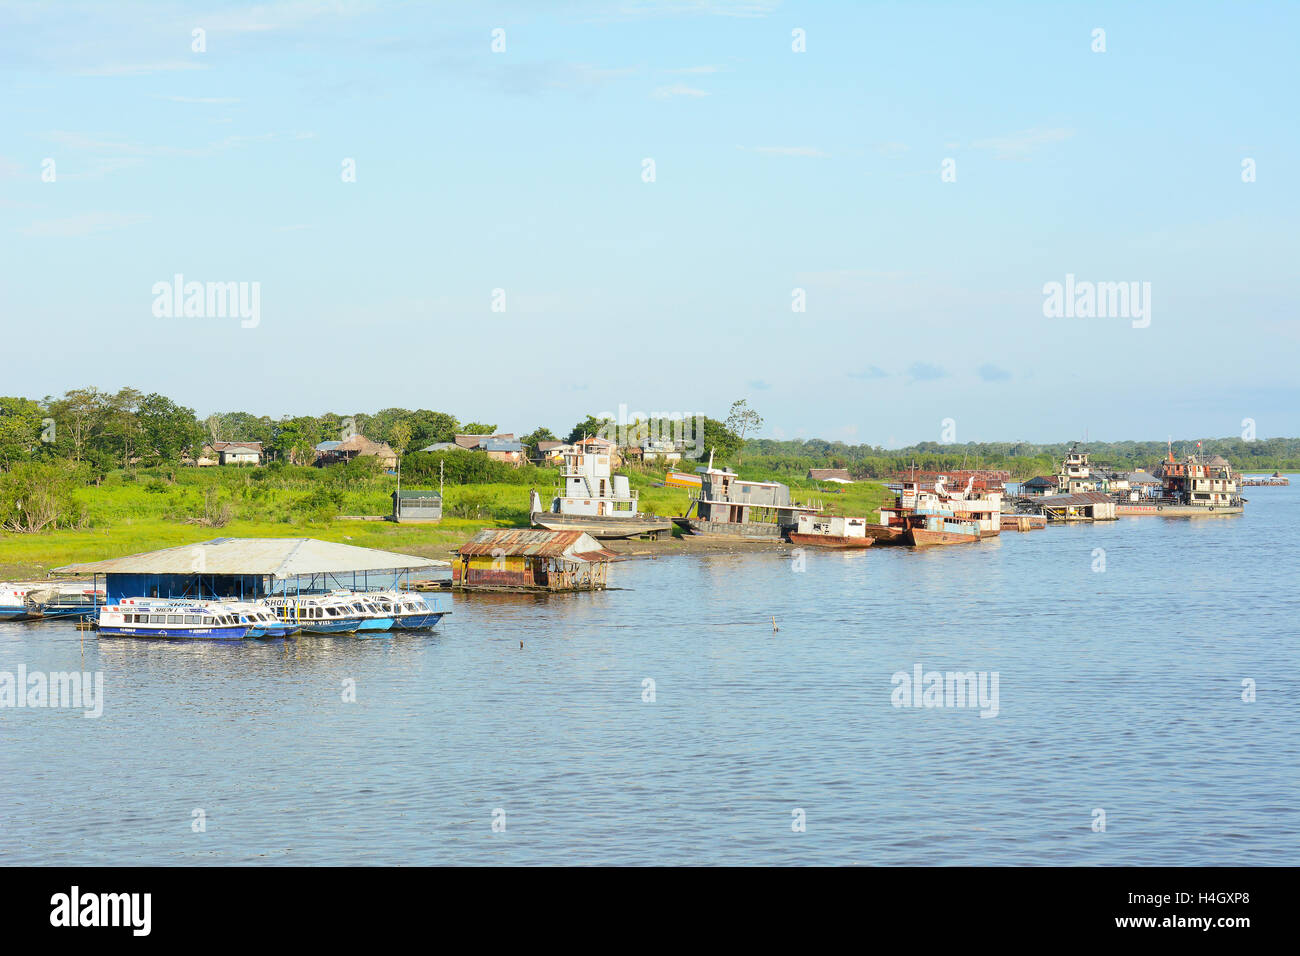 IQUITOS, PERU - OCTOBER 16, 2015: Boats at dock in the Itaya River. Iquitos is the largest metropolis in the Peruvian Amazon, an Stock Photo